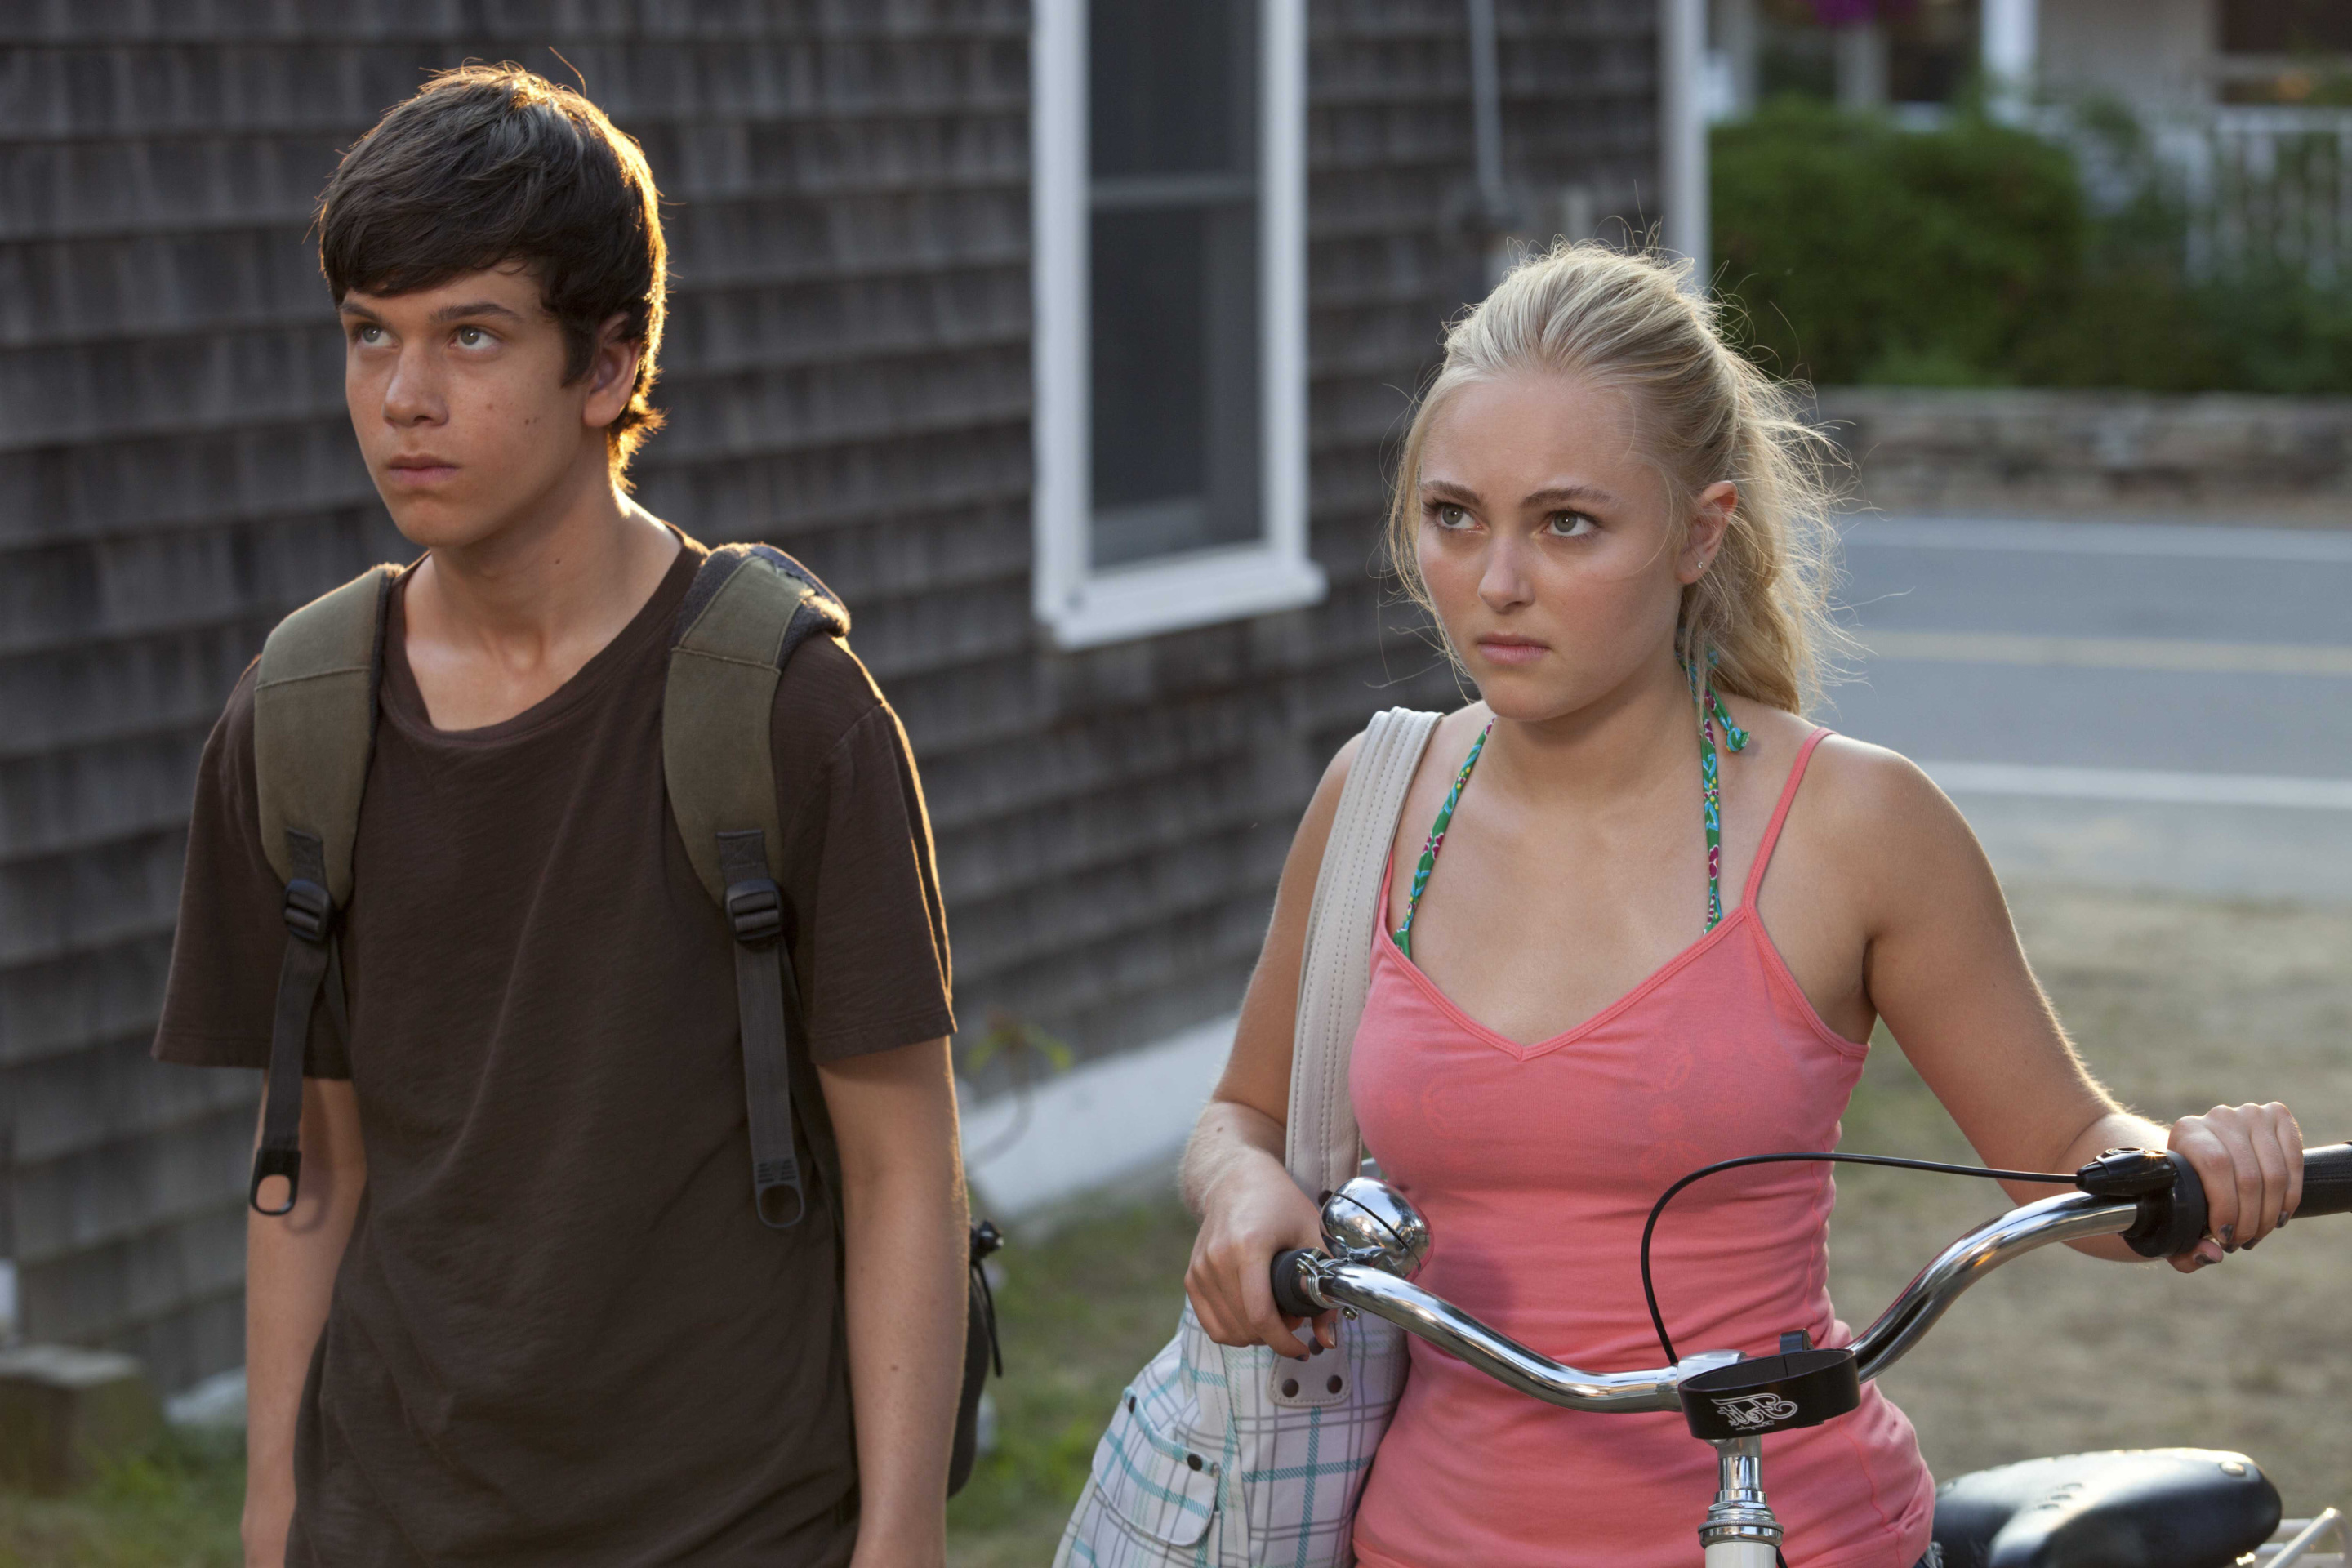 The Way, Way Back with AnnaSophia Robb and Liam James wallpaper 2880x1920